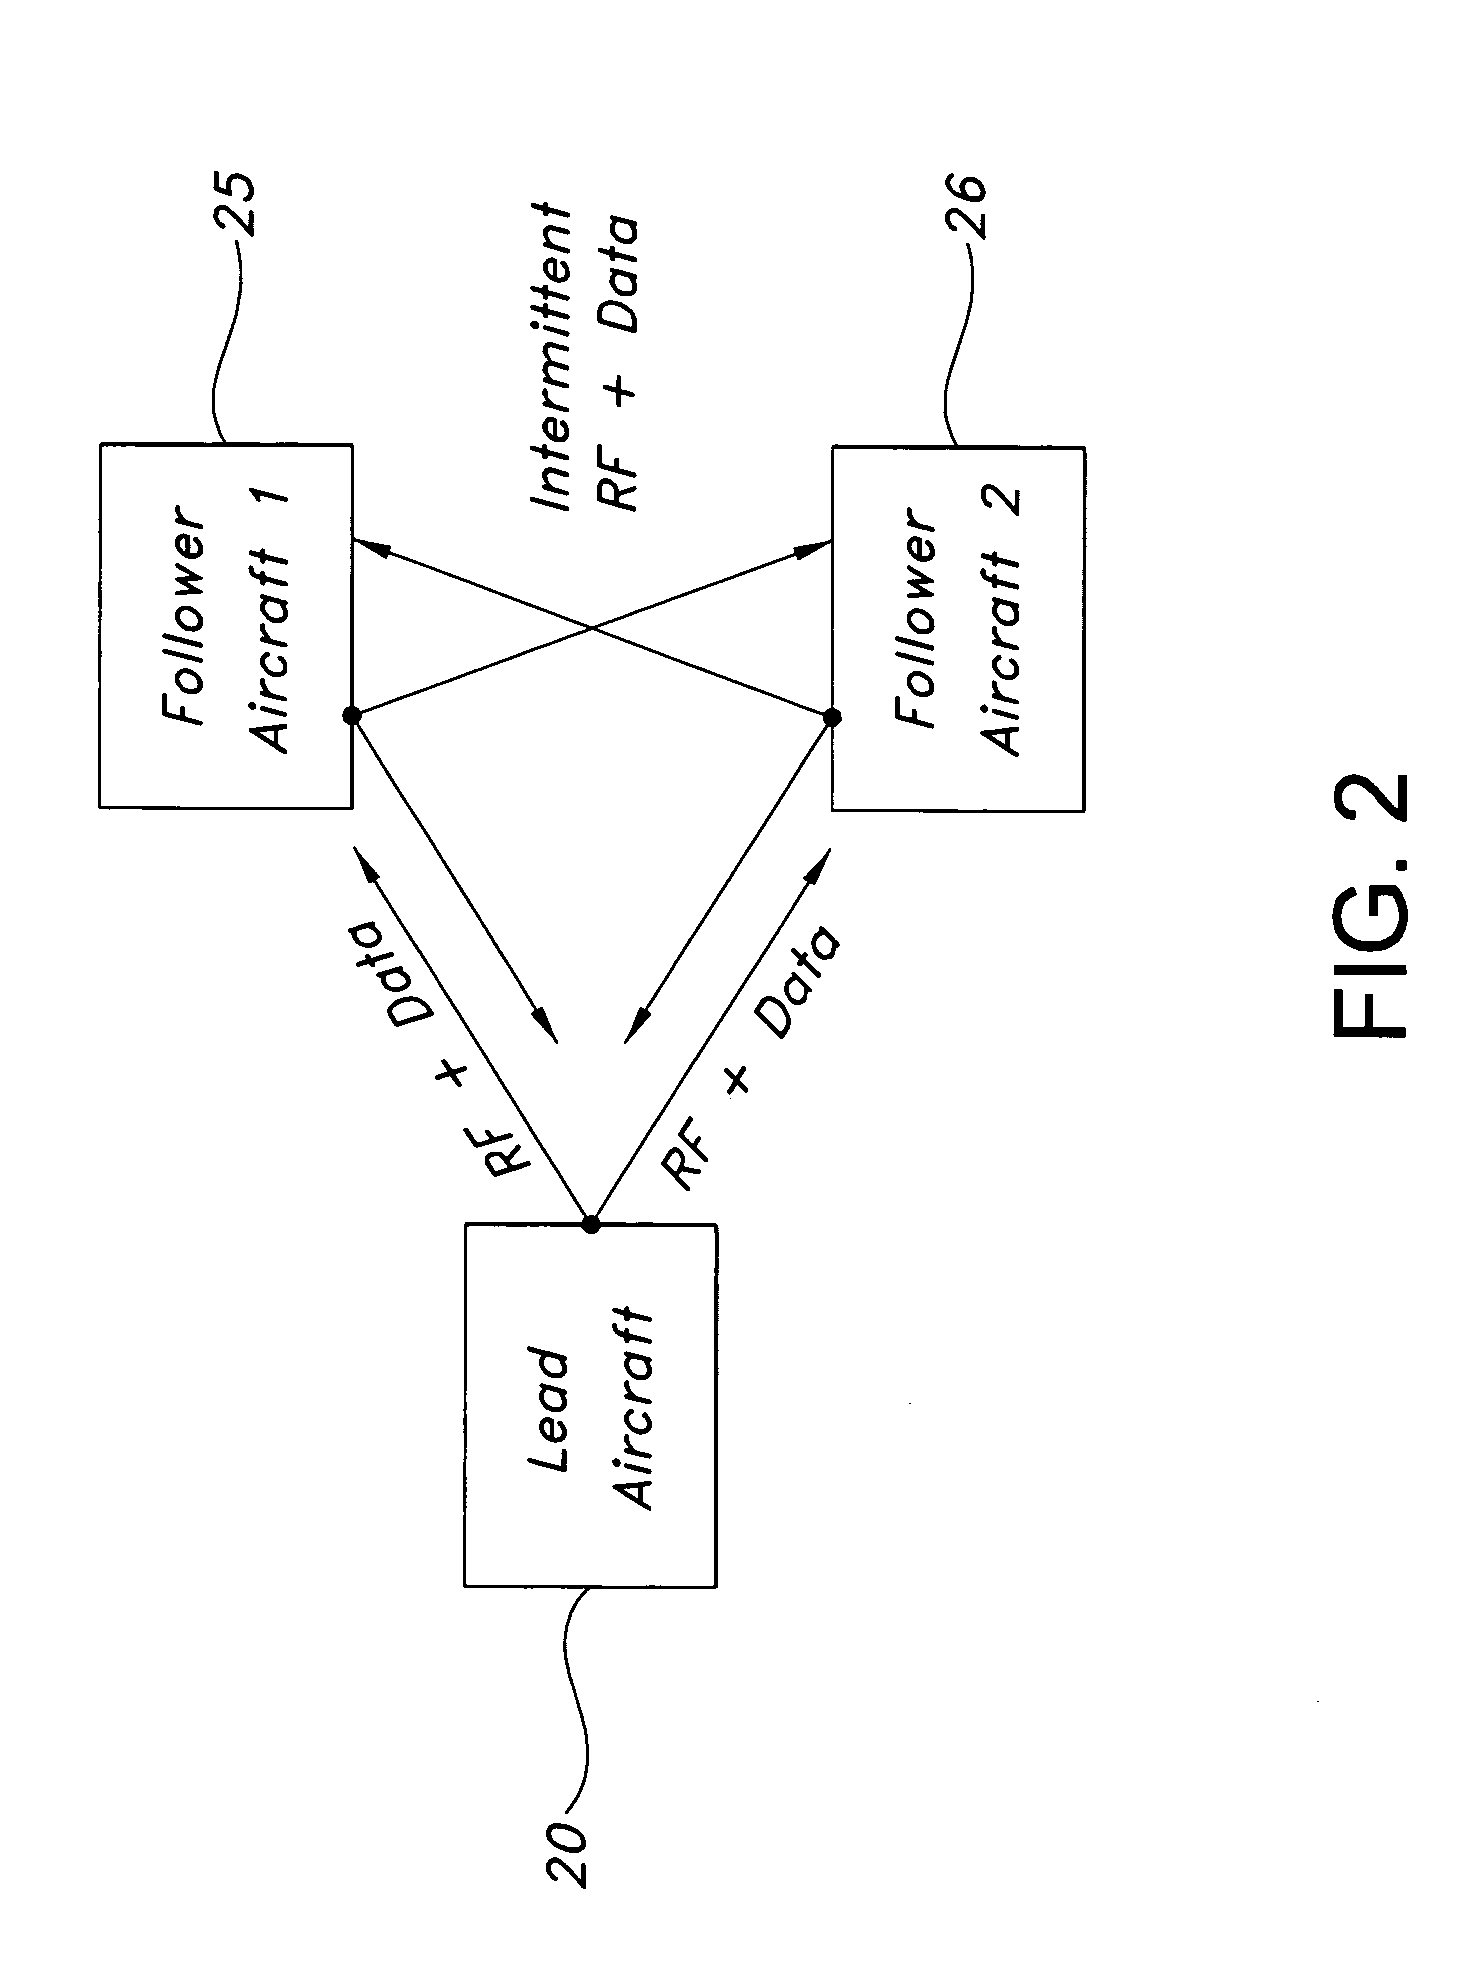 System and method for improving aircraft formation flying accuracy and integrity